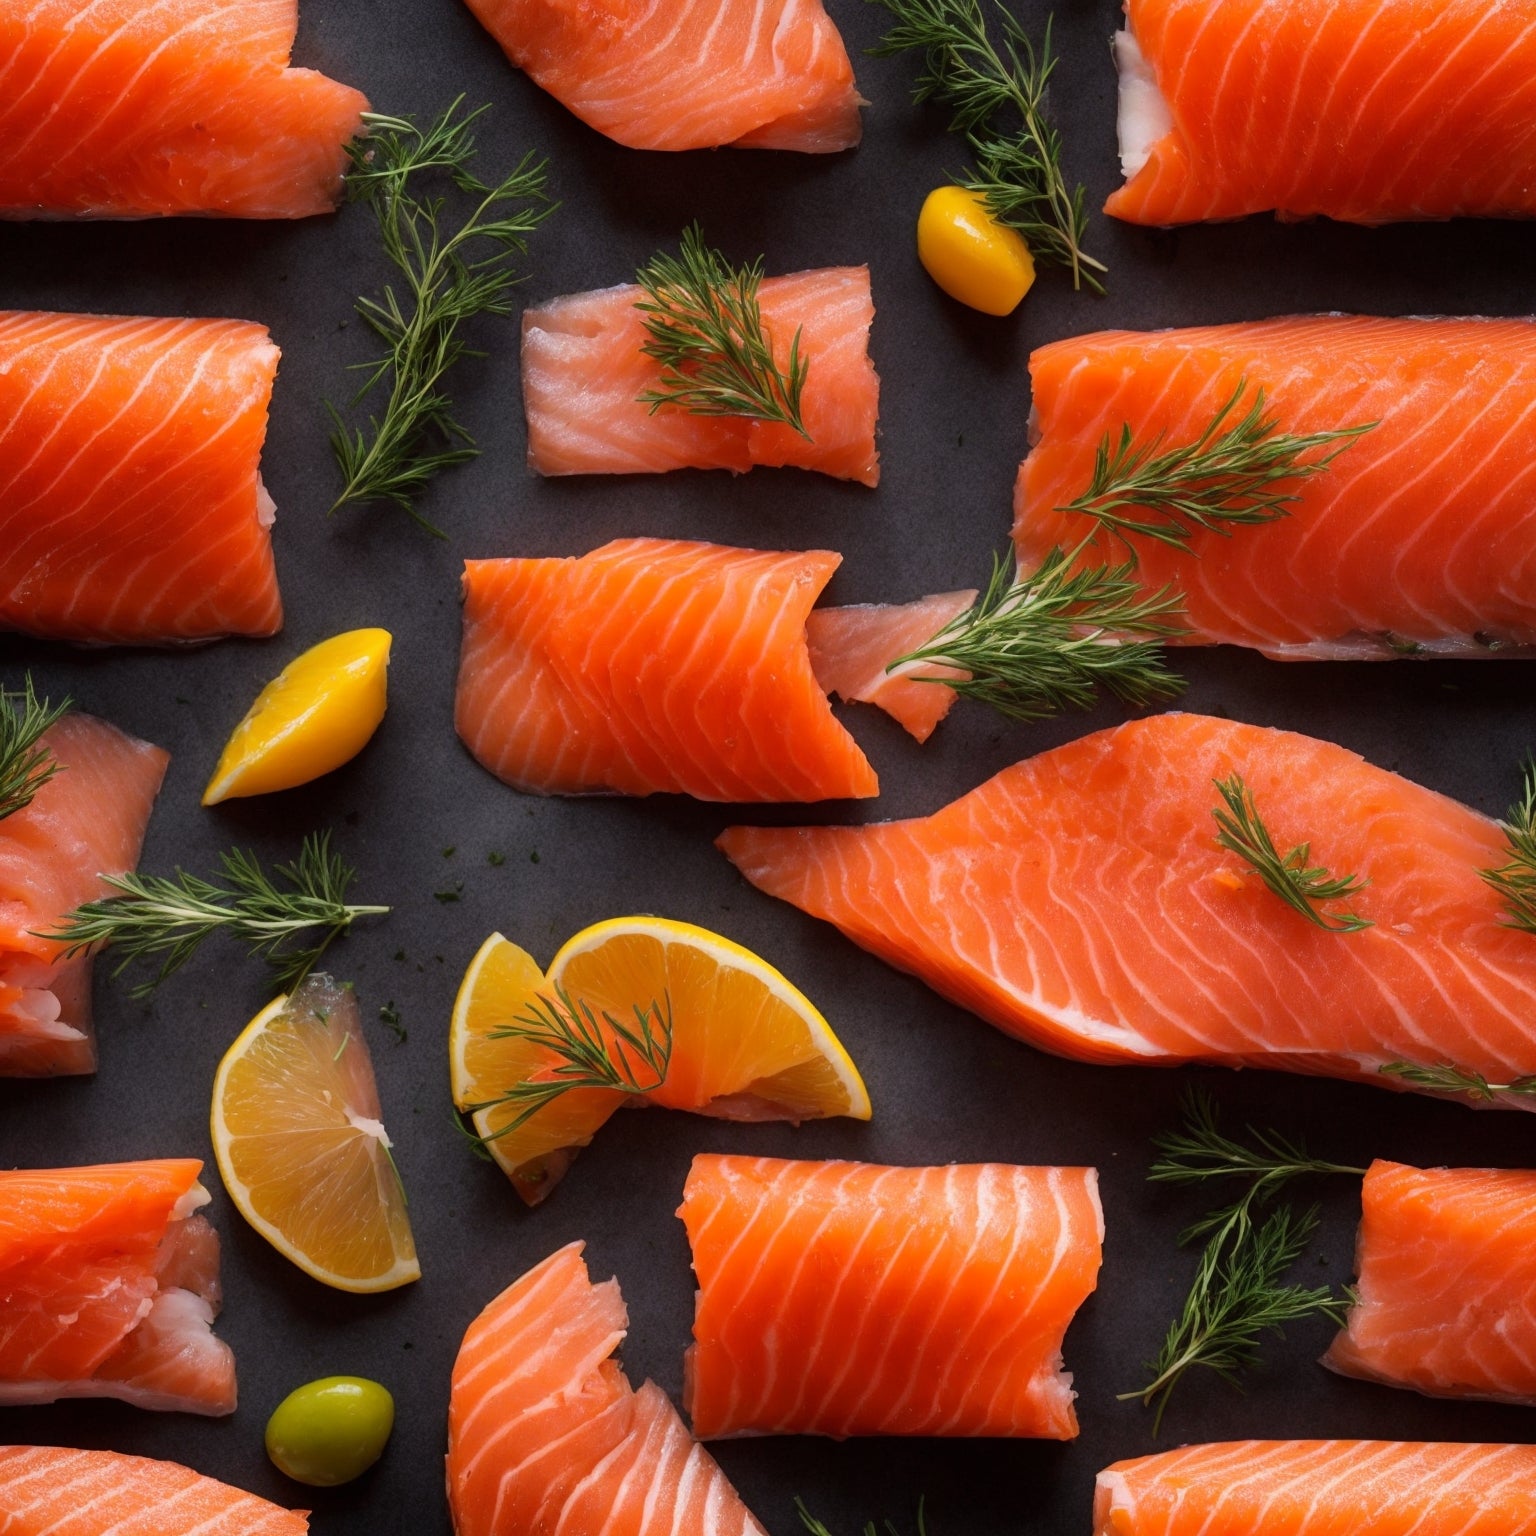 Salmon Lox Secrets: What Makes It an Exquisite Culinary Experience